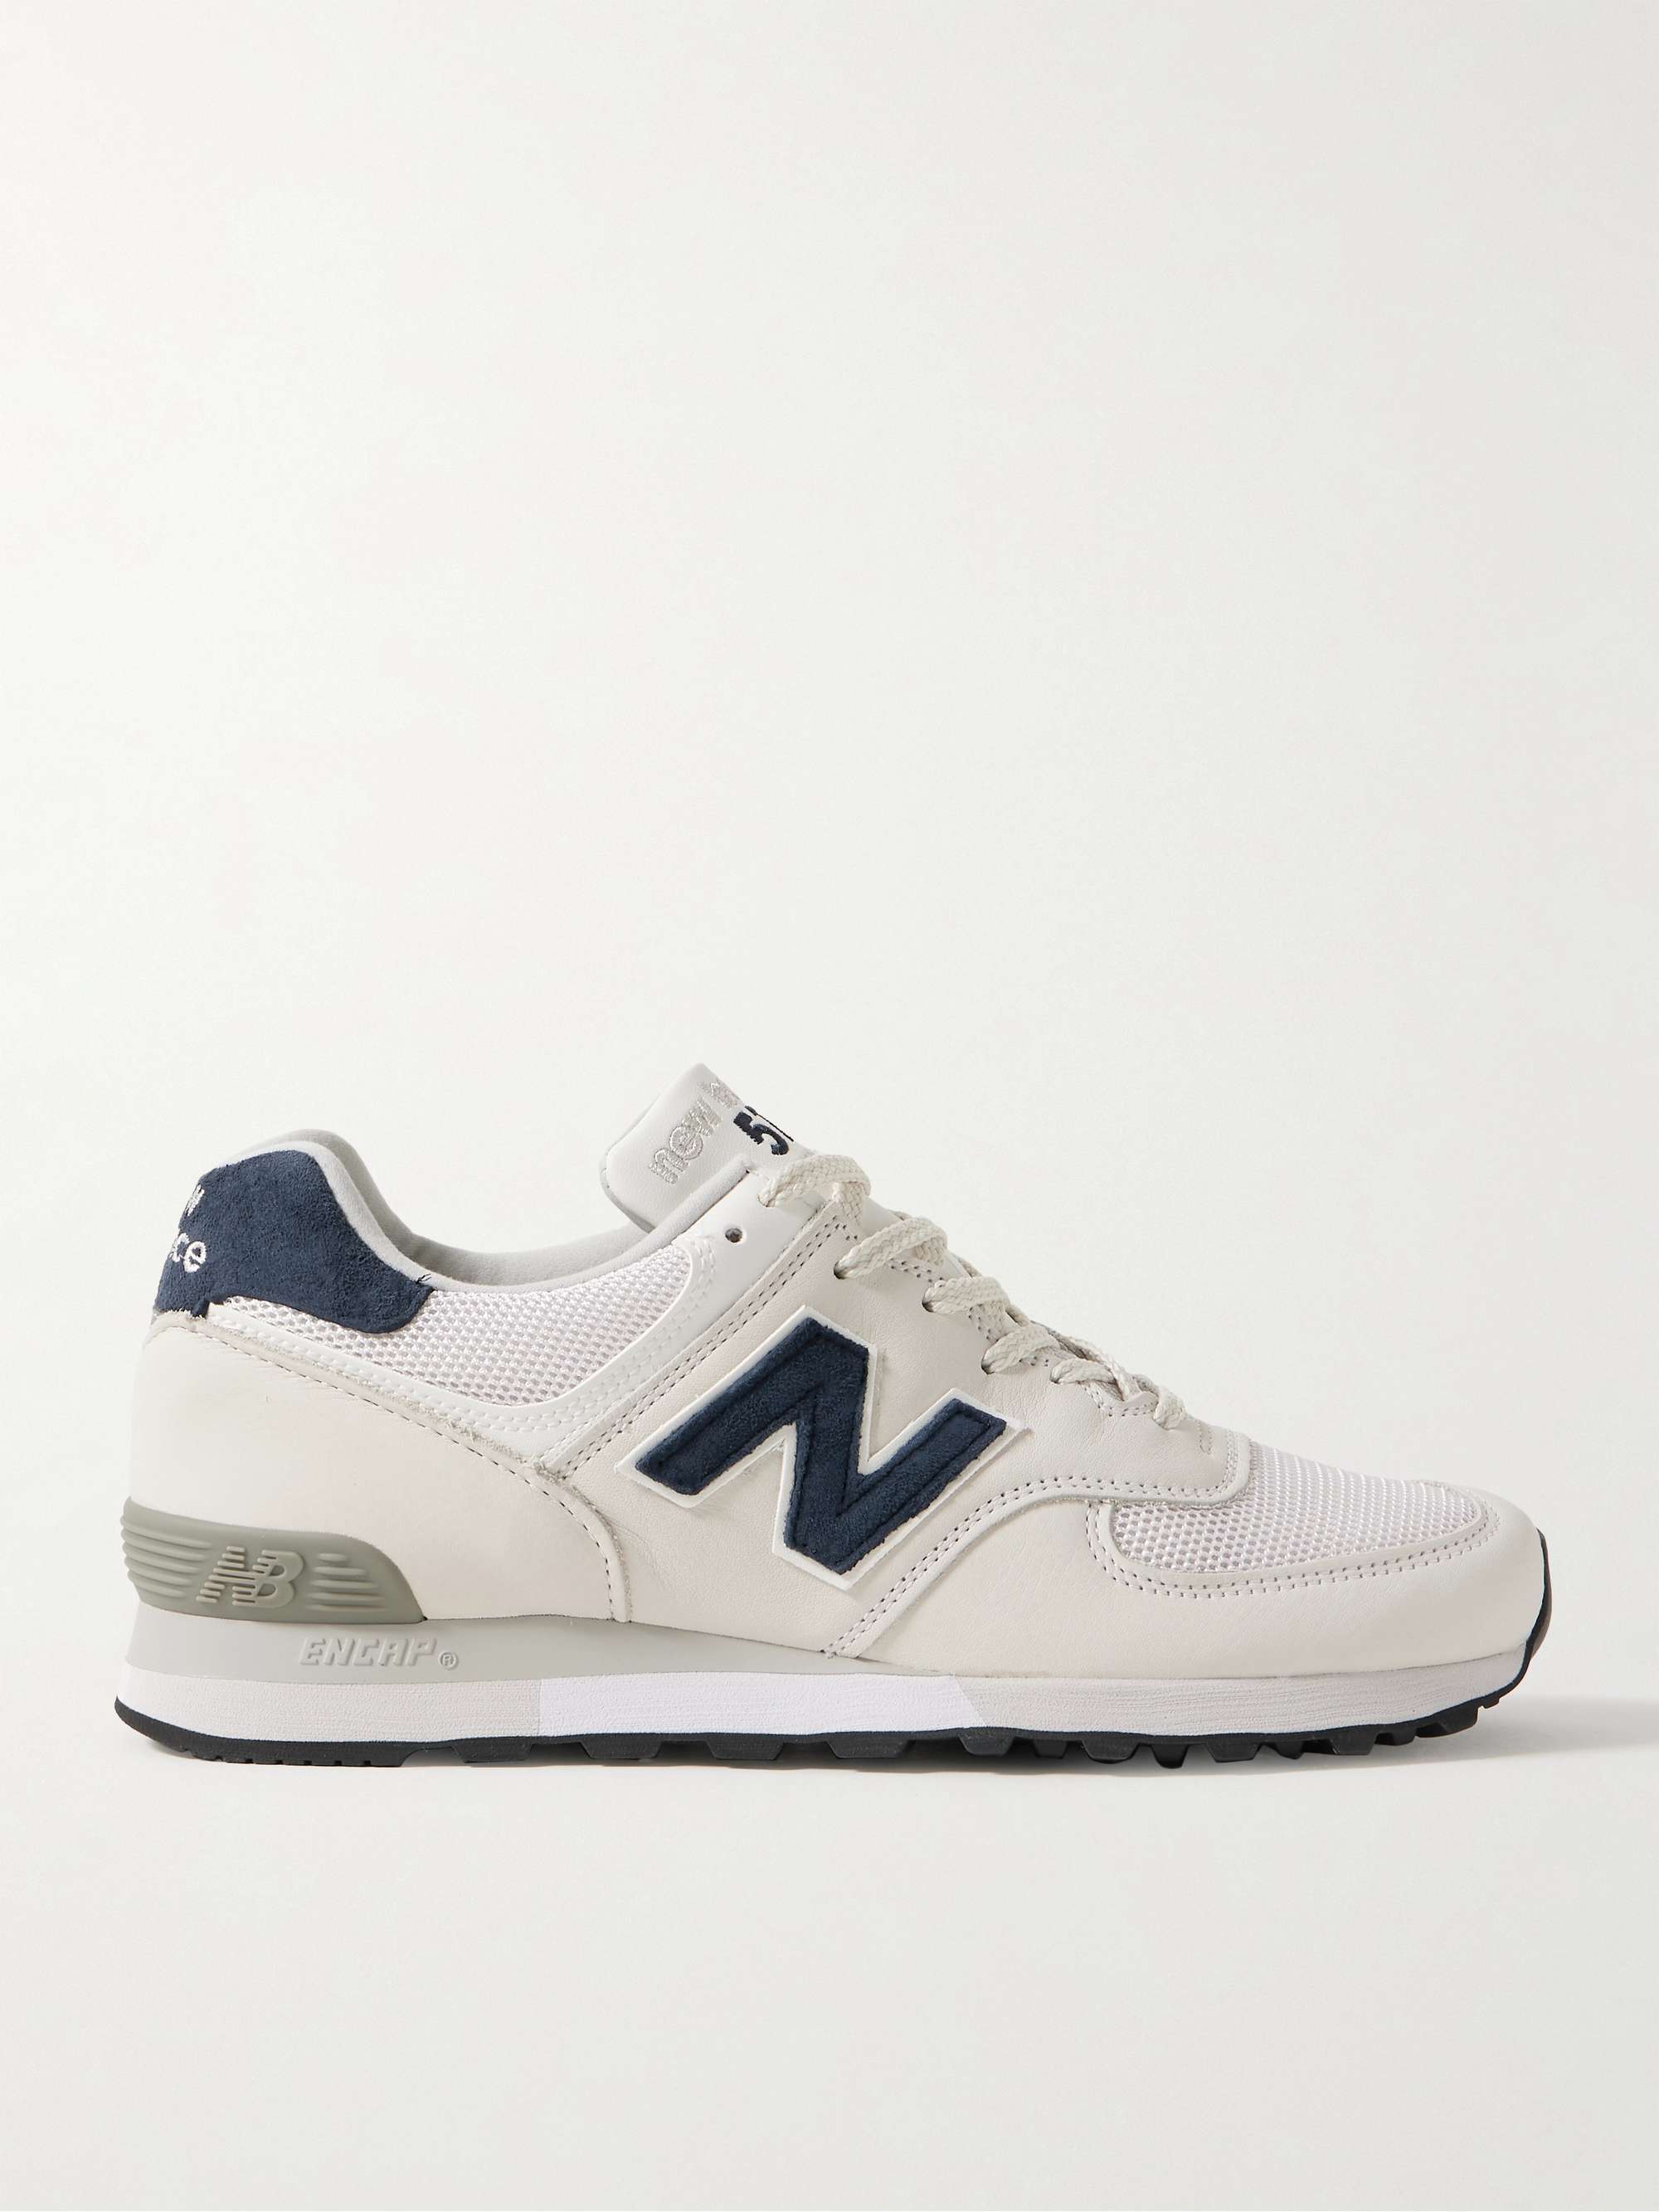 NEW BALANCE 576 Suede-Trimmed Leather and Mesh Sneakers for Men